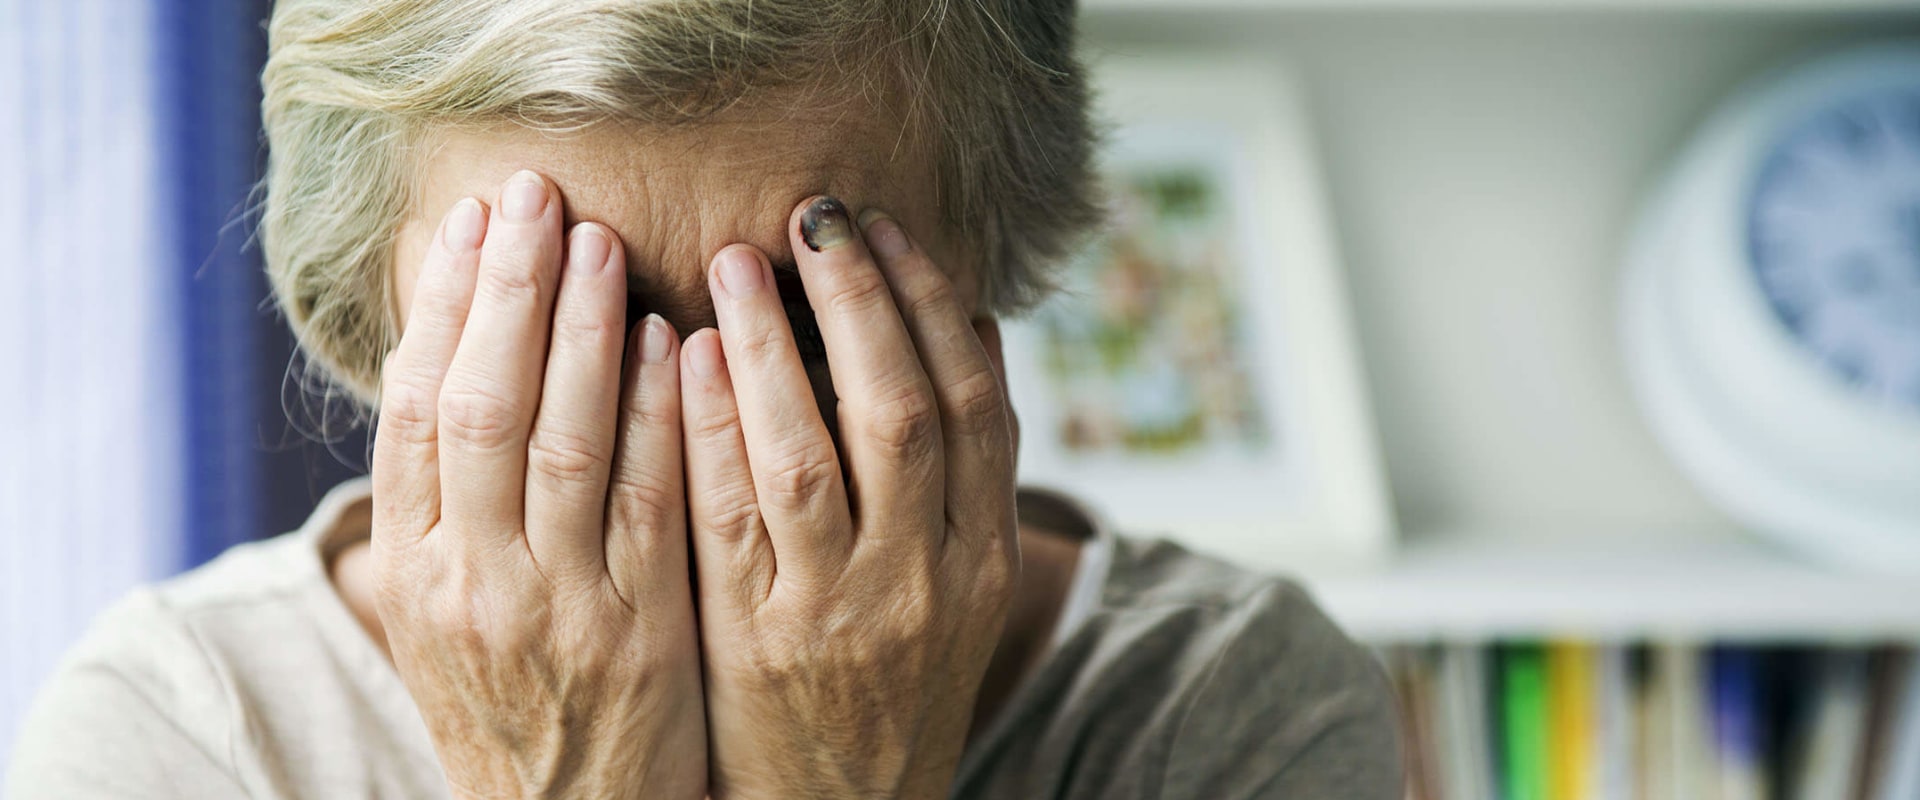 What is the most common form of elderly abuse?